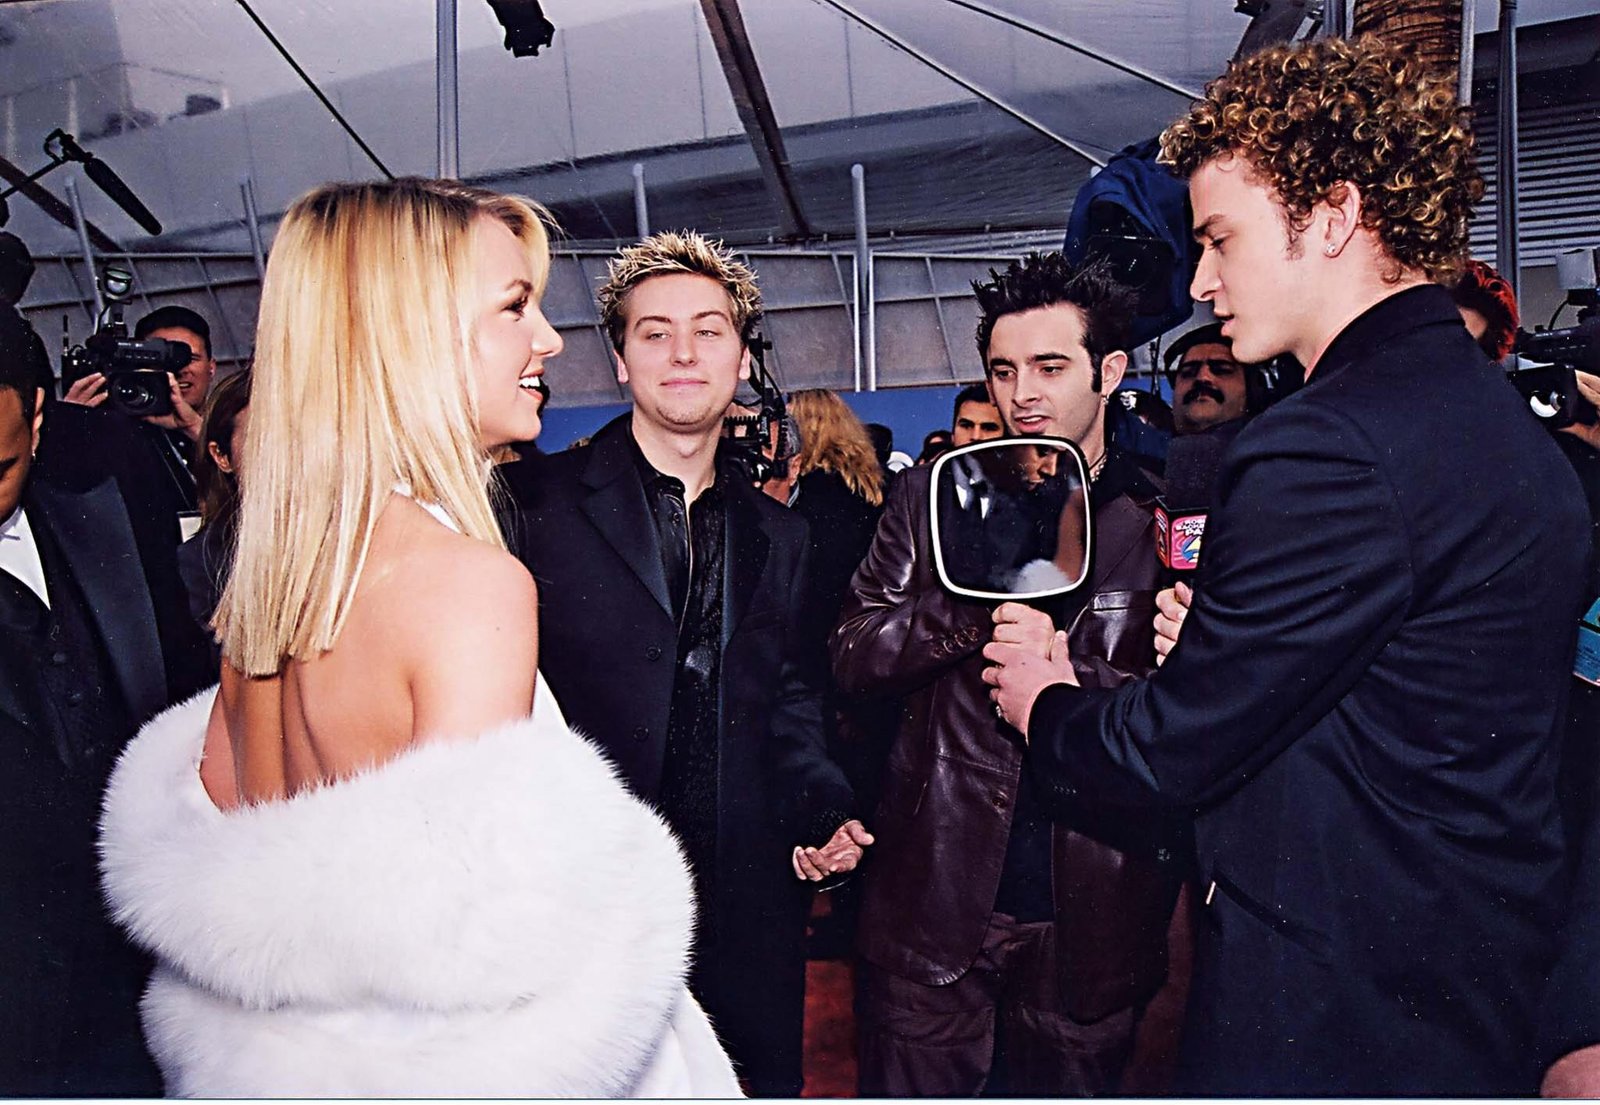 Spears and *NYSYNC members